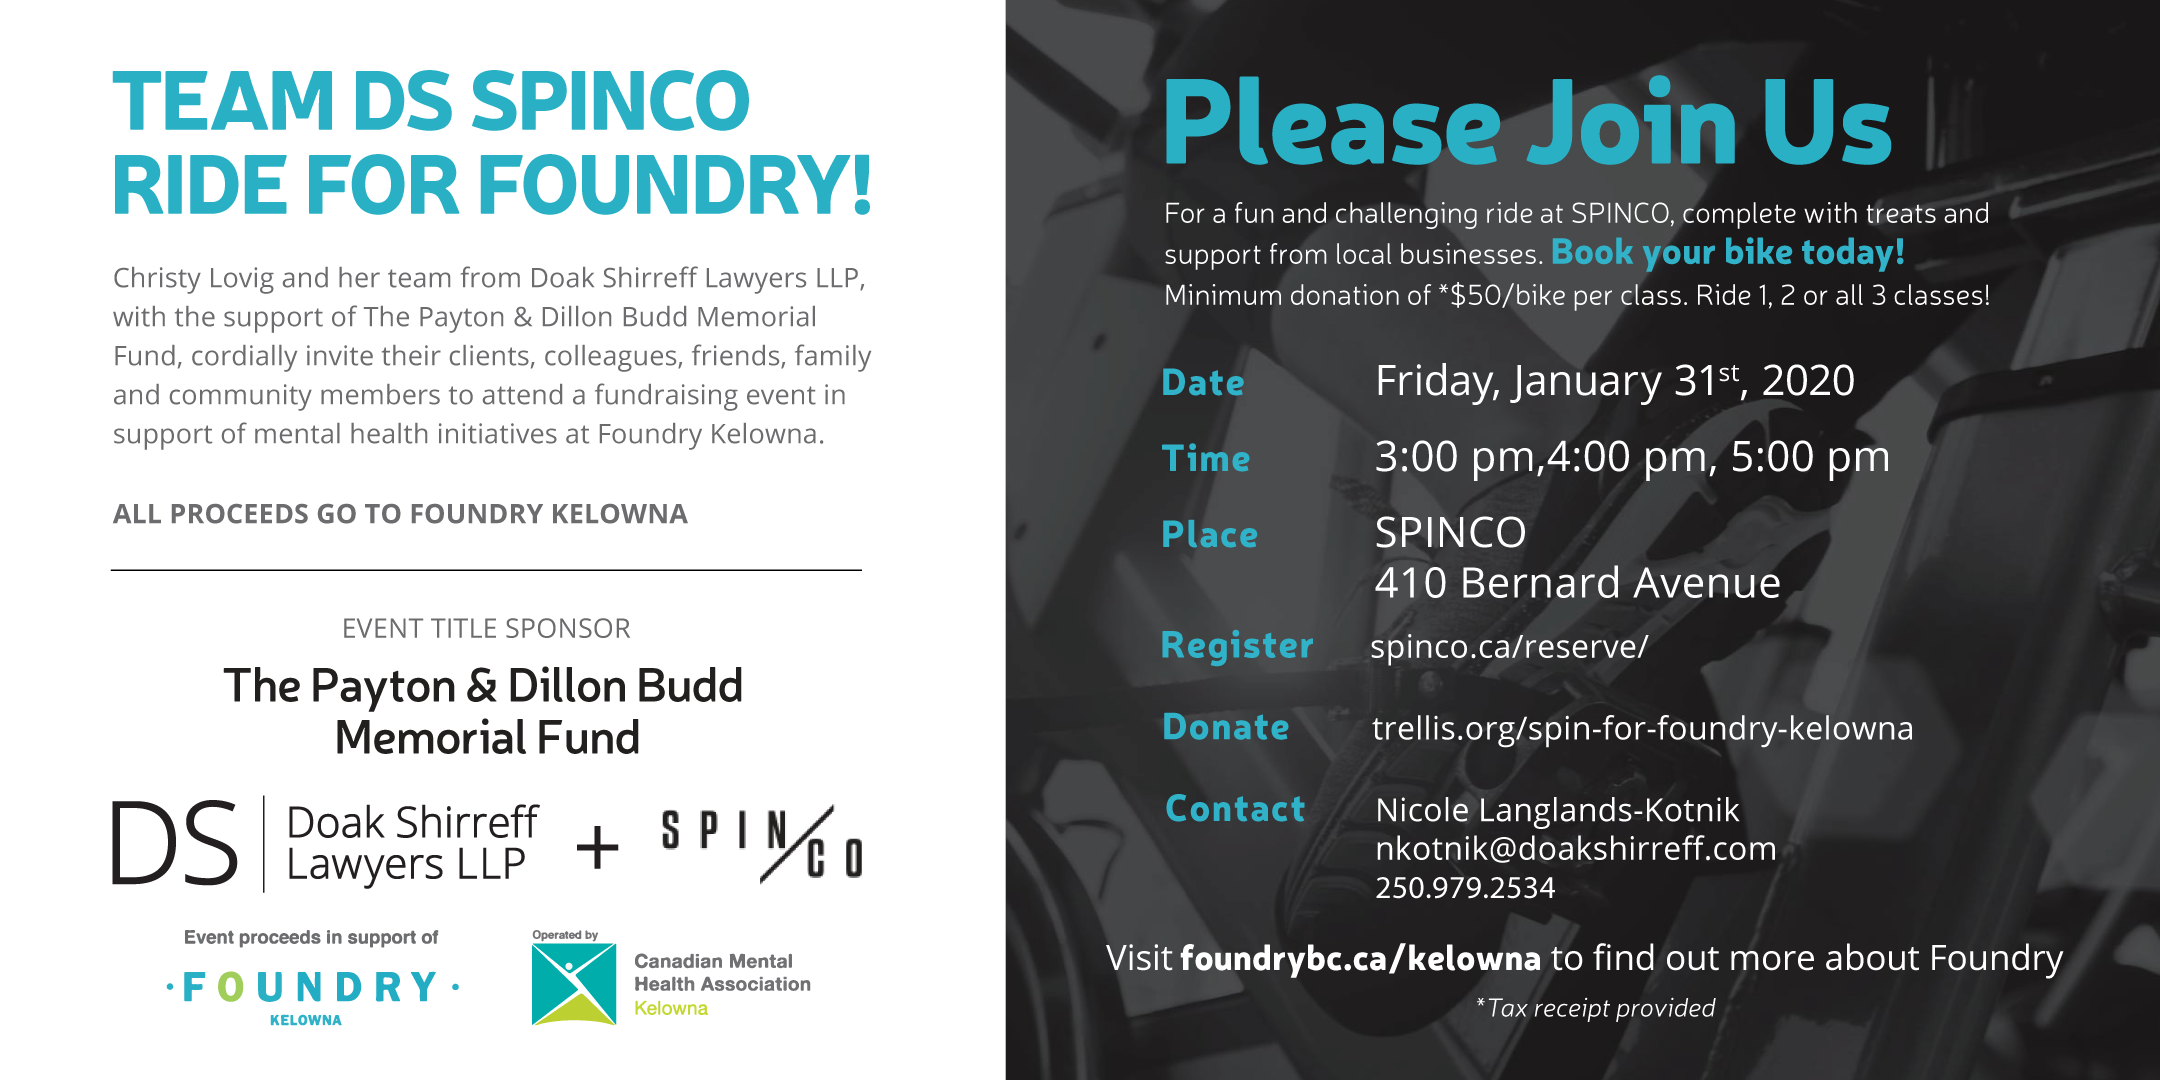 Spin Co Event in support of Foundry for Mental Health